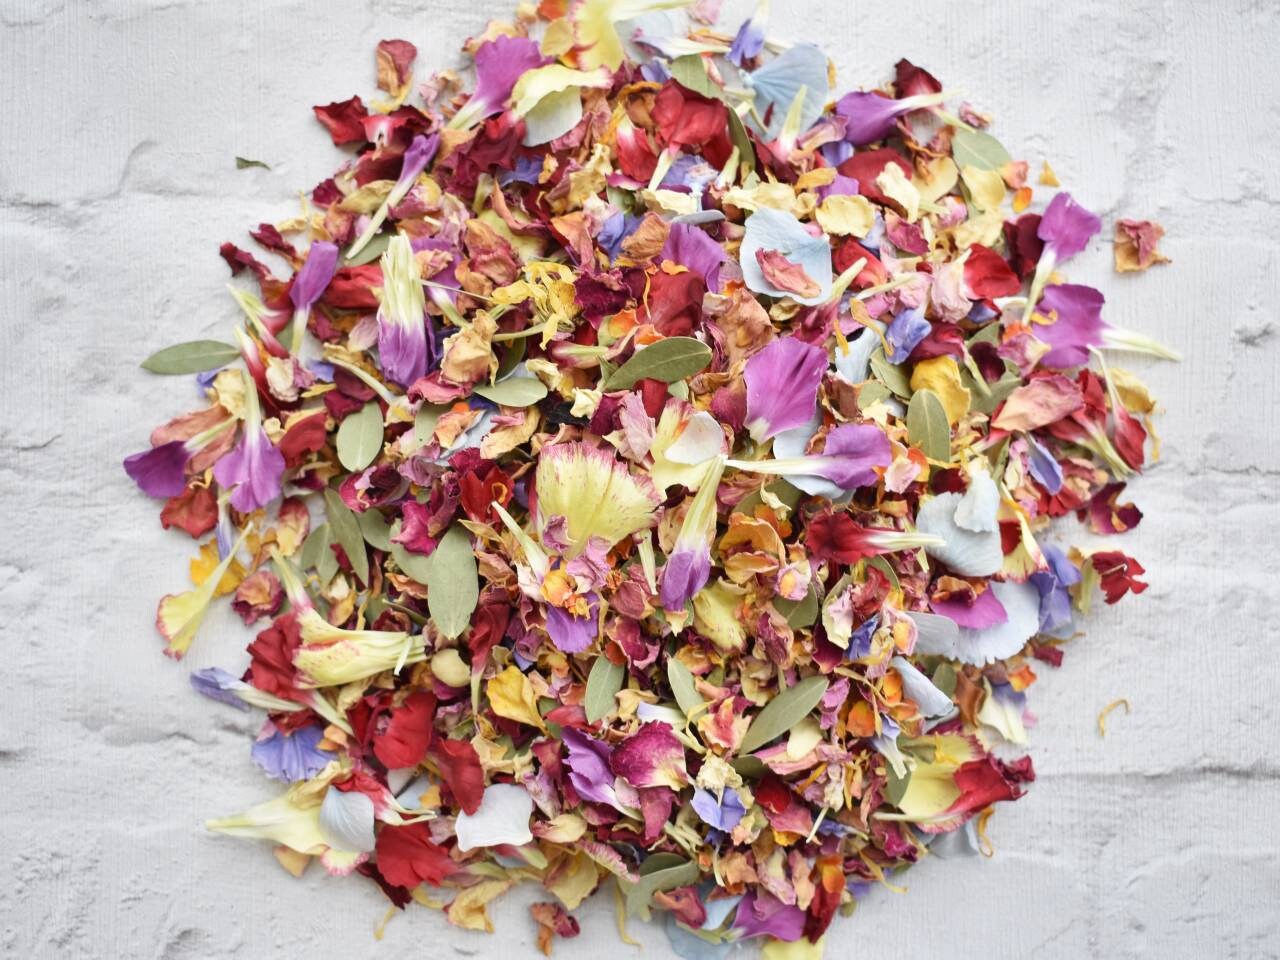 Biodegradable Wedding Confetti Eco-friendly Sustainable Wedding Premium  British Real Dried Flower Petals 1-10 Litres 10-120 Handfuls 